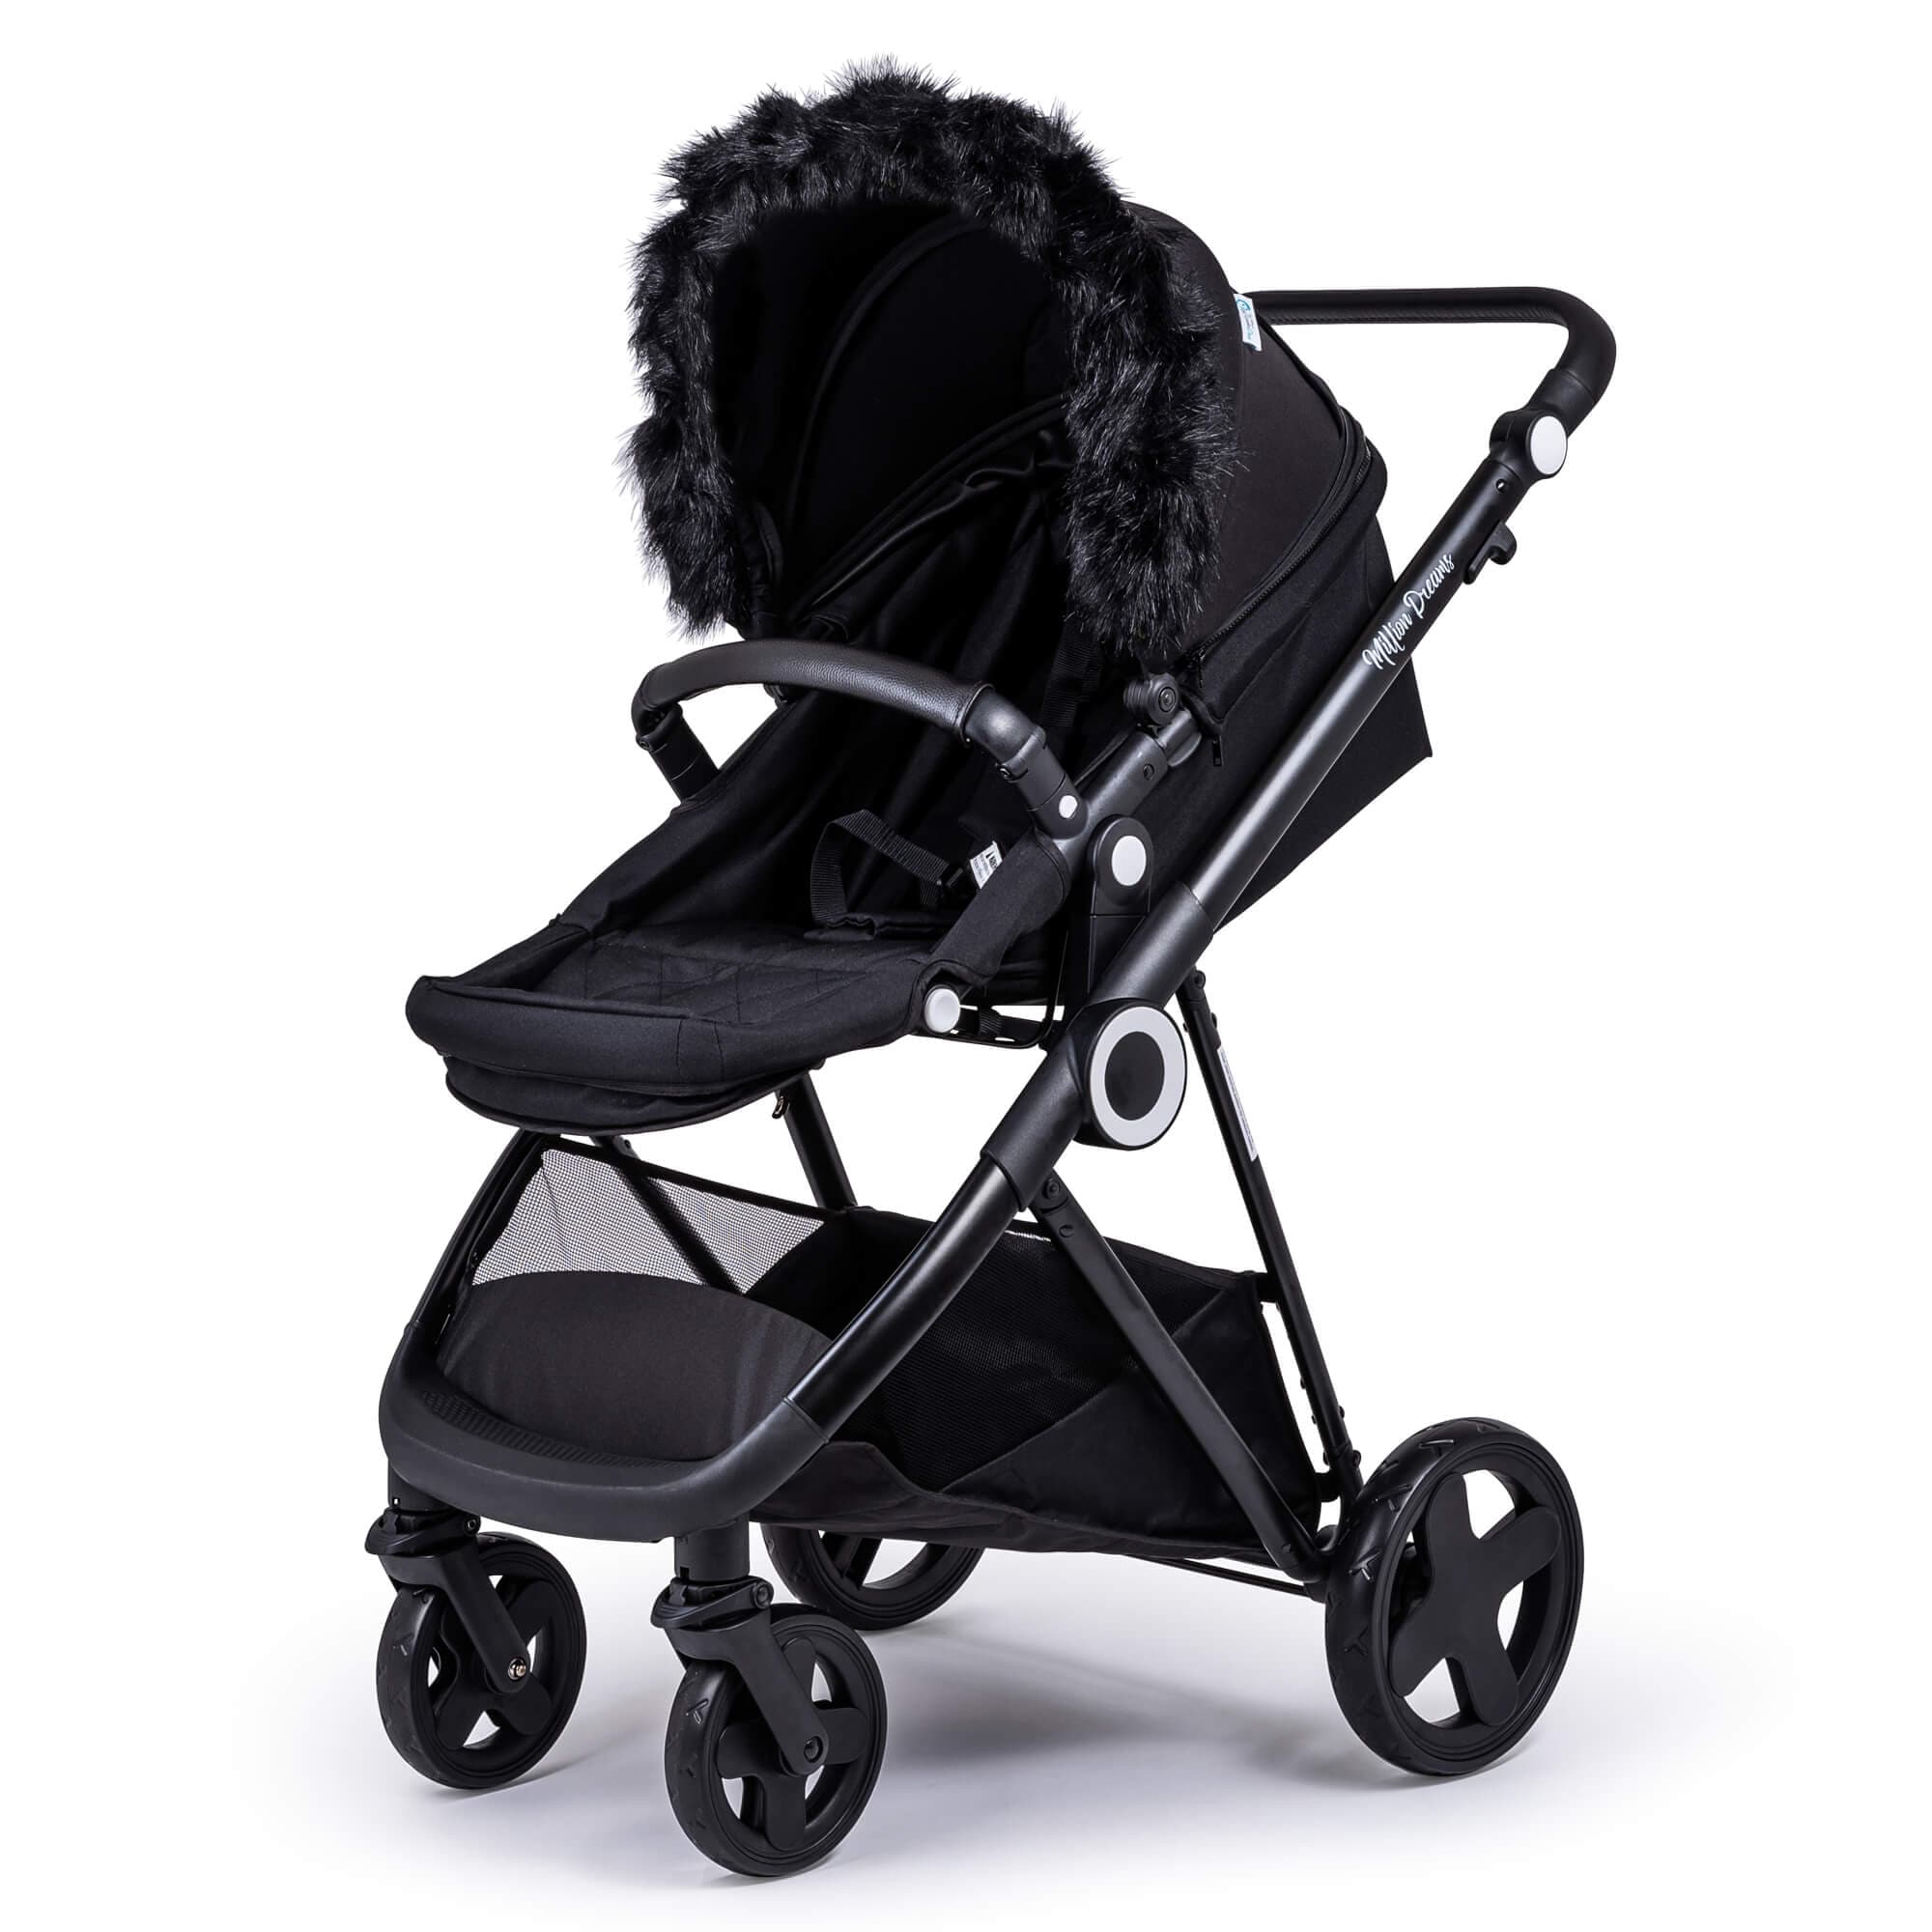 Pram Fur Hood Trim Attachment for Pushchair Compatible with Mamas & Papas - For Your Little One